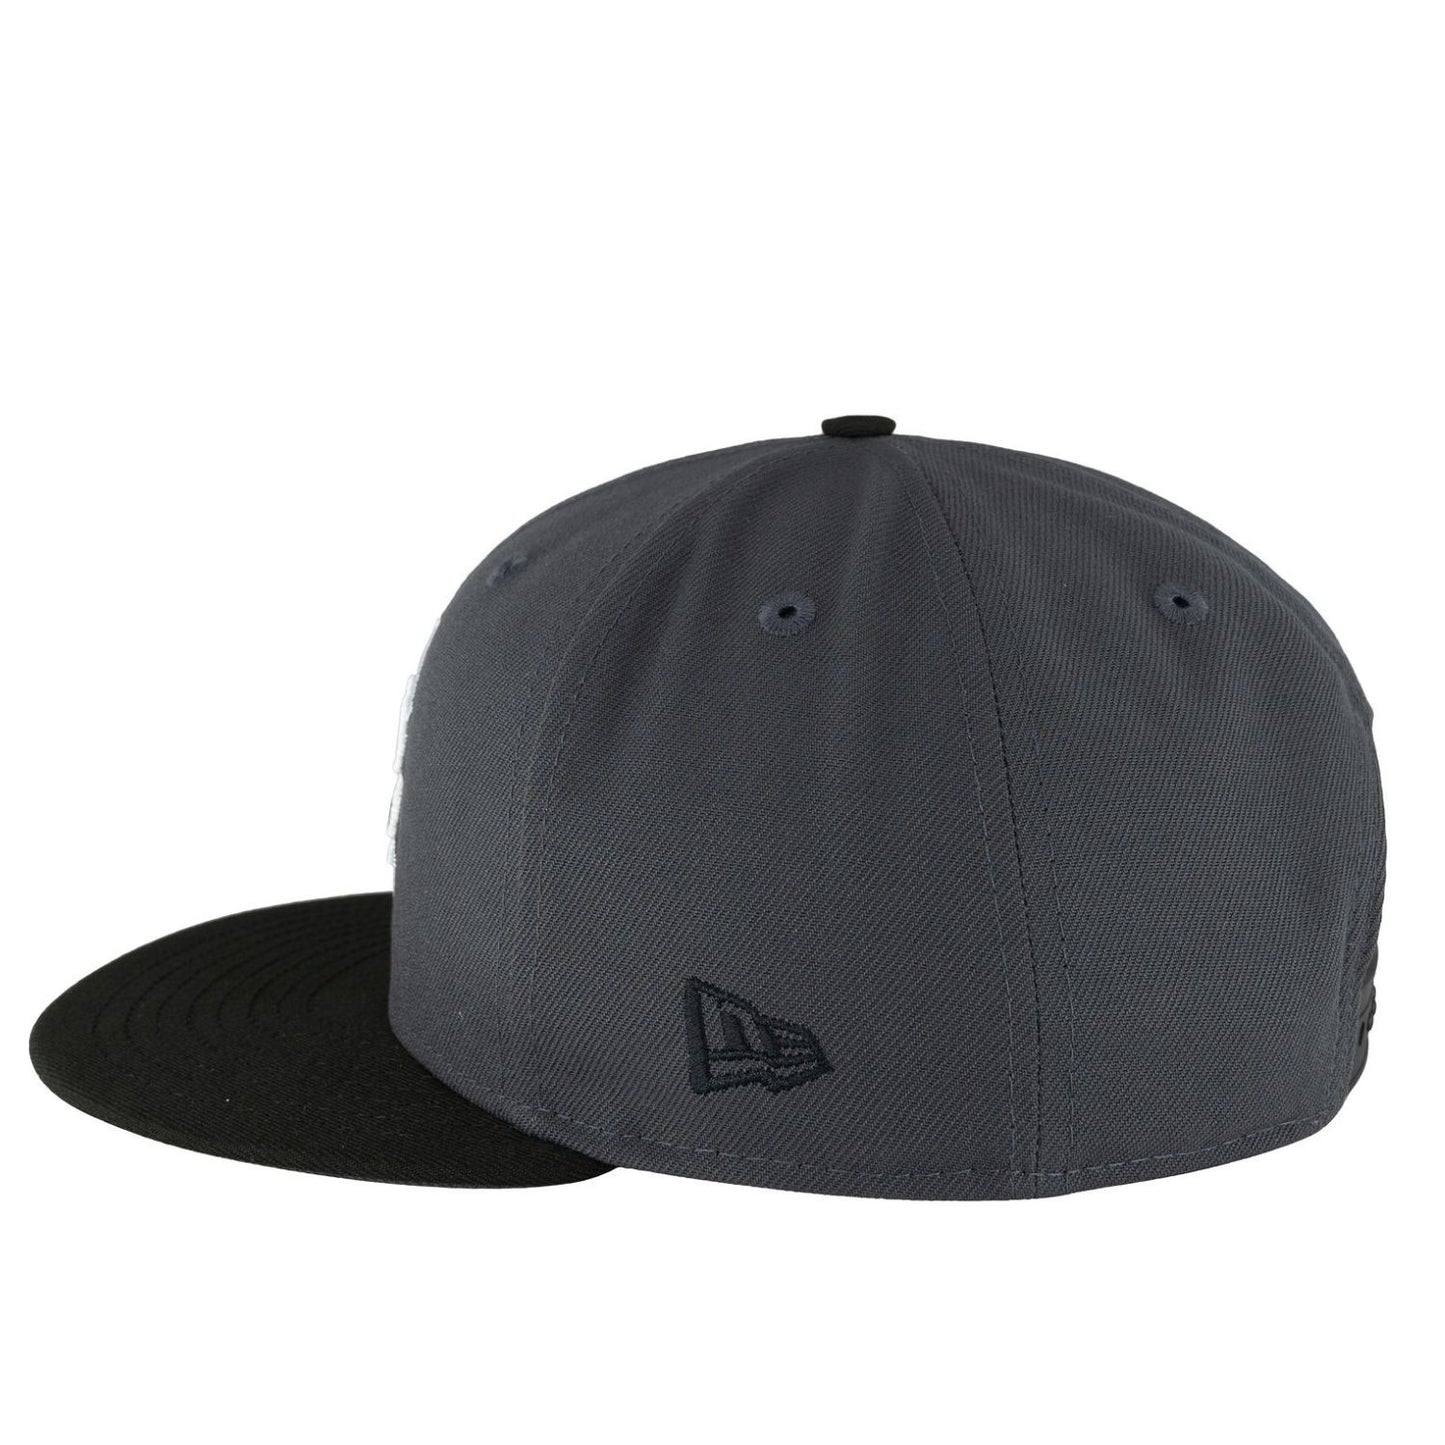 Chicago Cubs Graphite/Black New Era 9FIFTY Snapback Hat